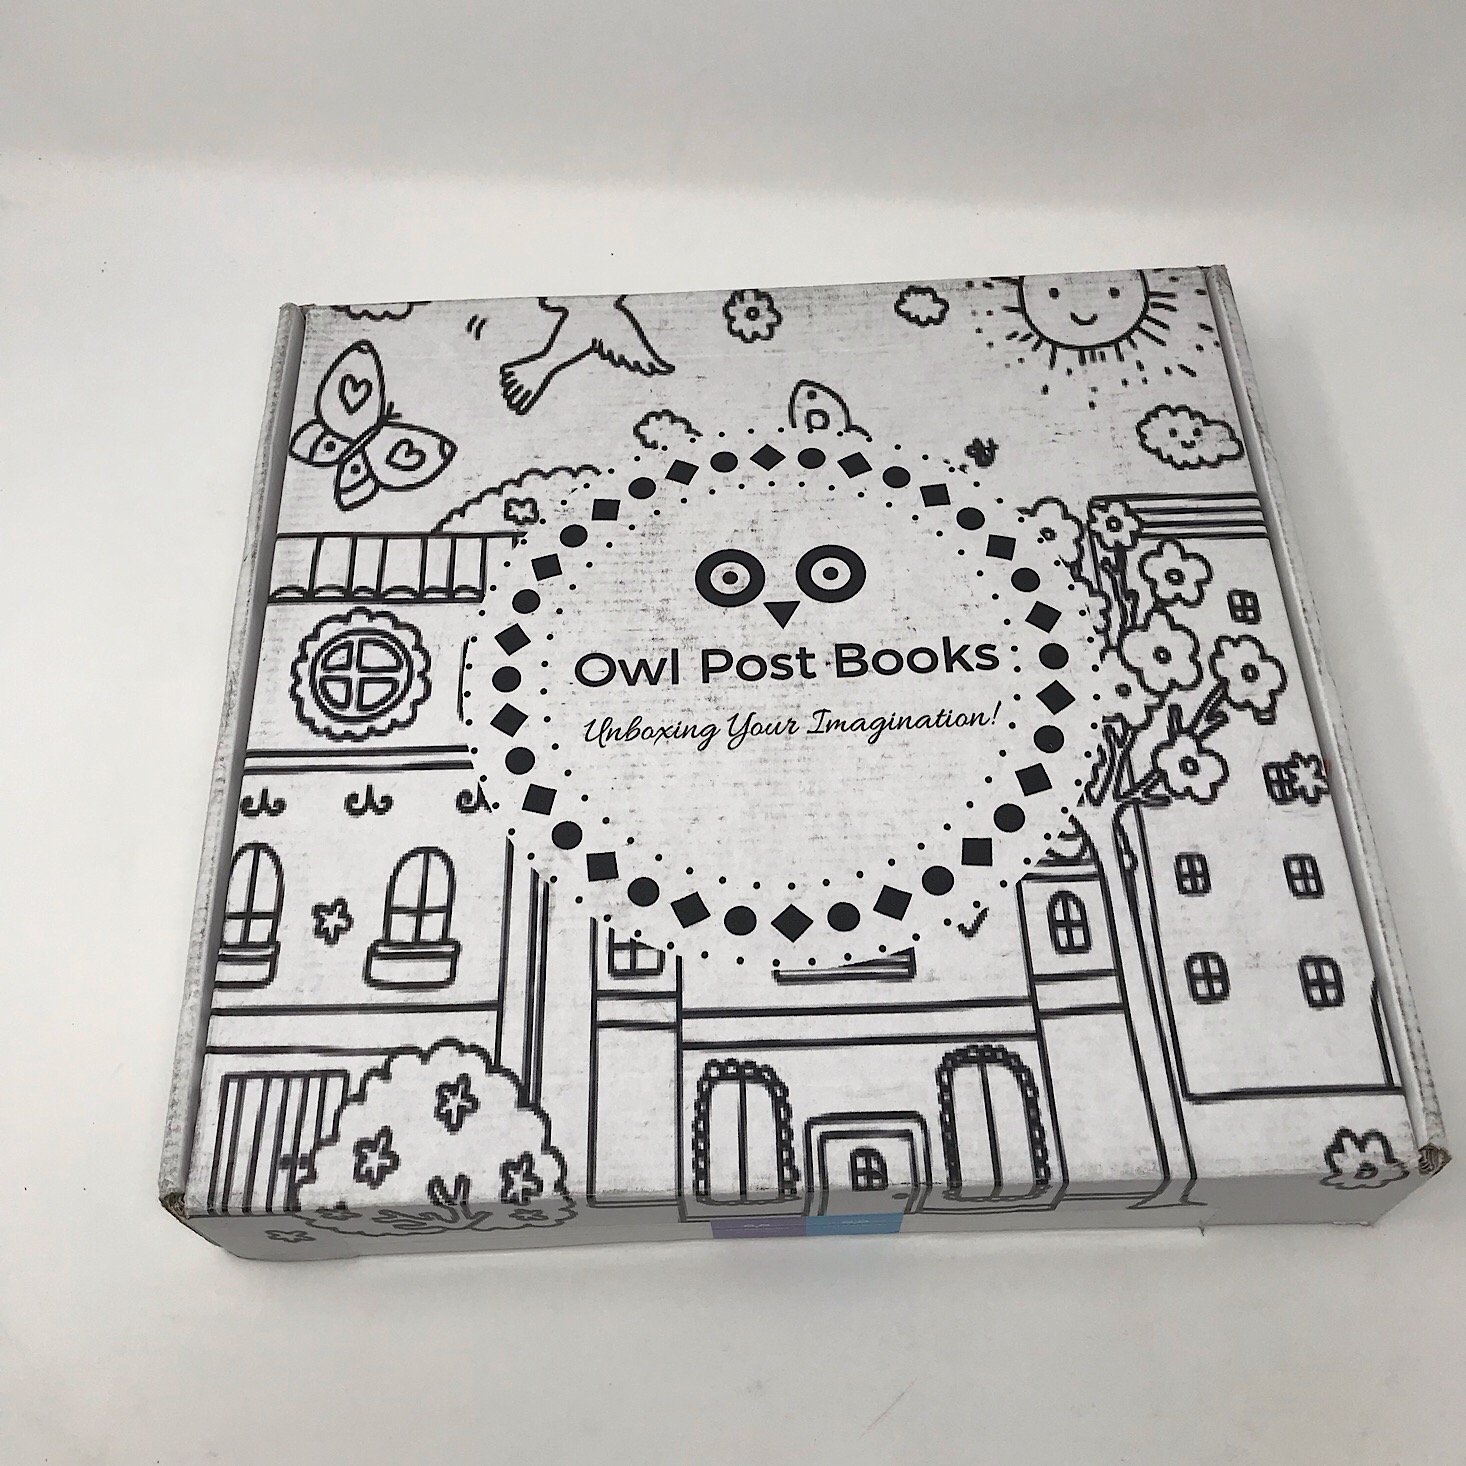 Owl Post Books Subscription Box Review – June 2019